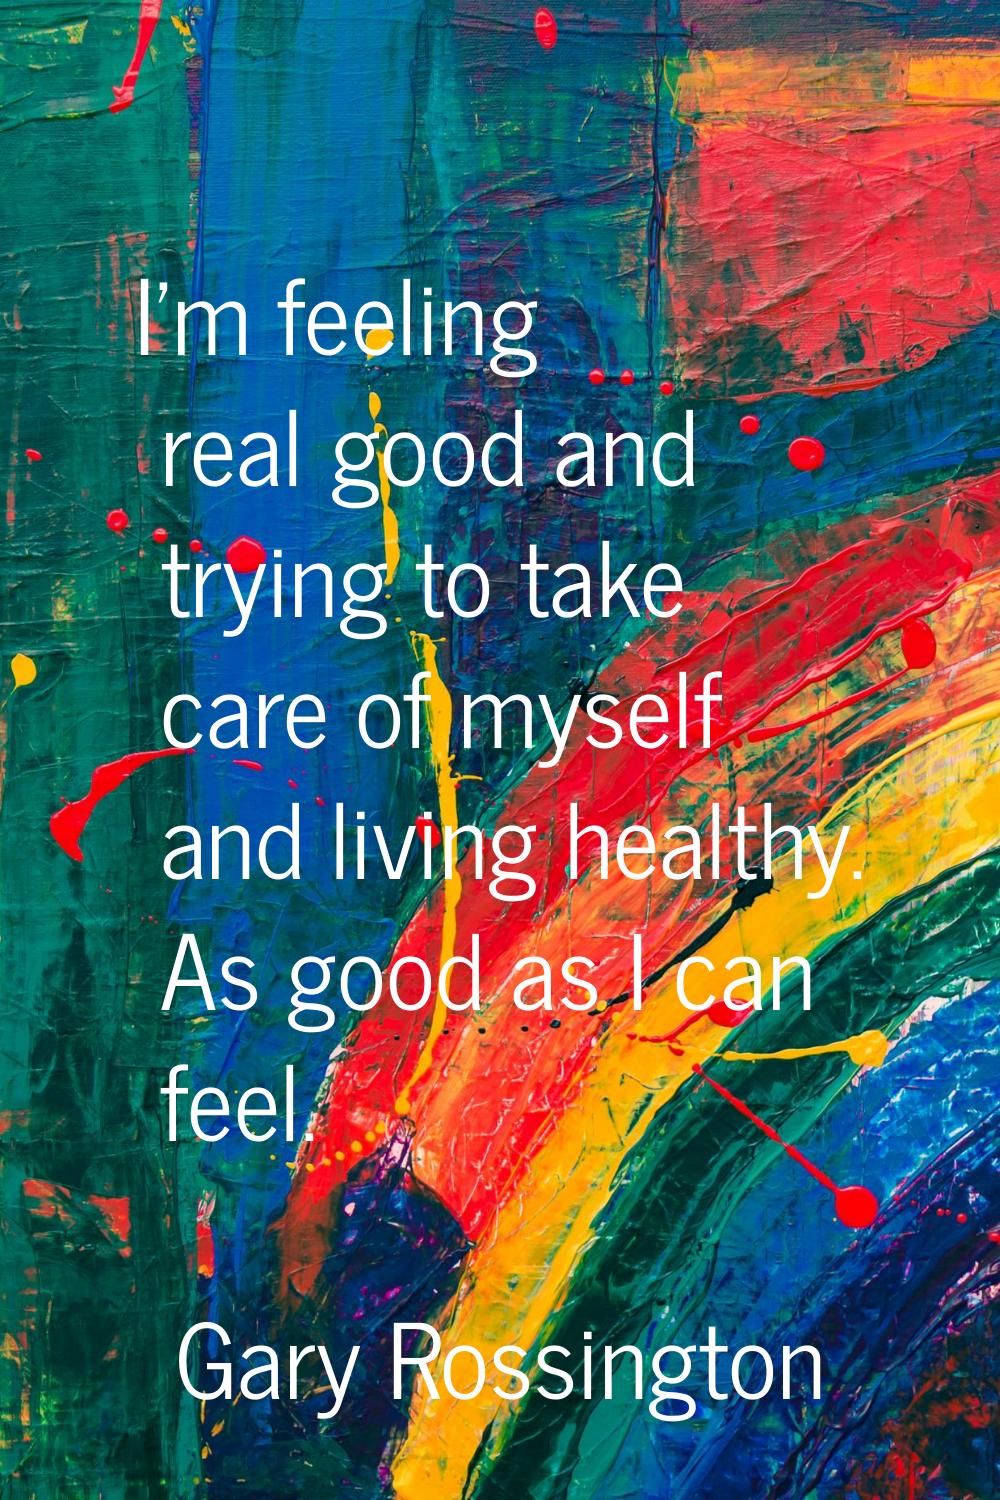 I'm feeling real good and trying to take care of myself and living healthy. As good as I can feel.